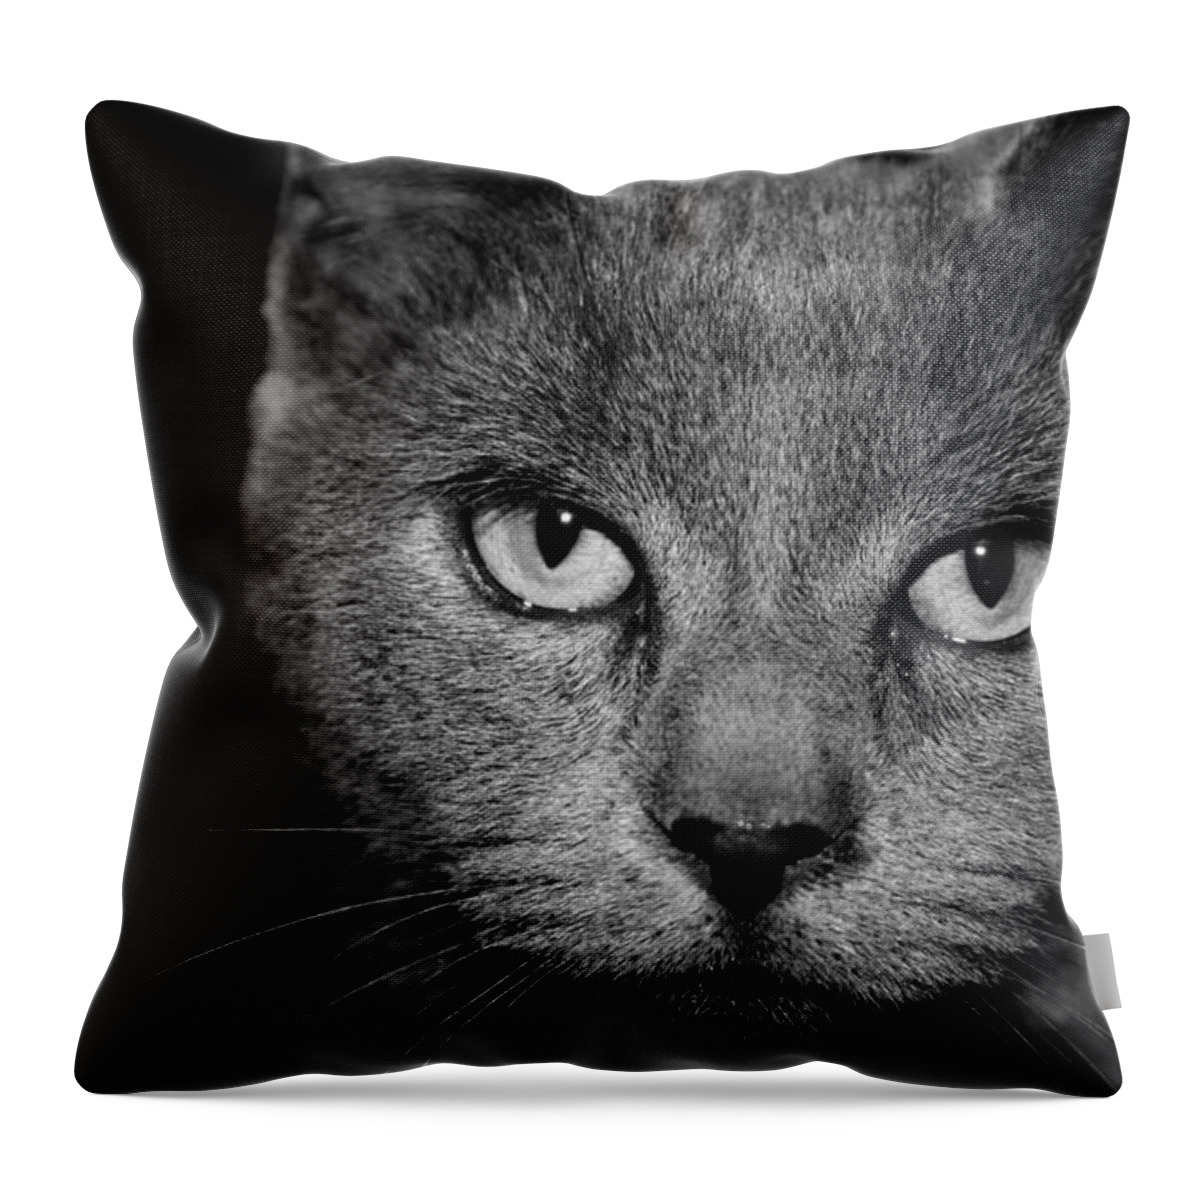 Cat Russian Blue Eyes Emotion Stare Black Whiskers Throw Pillow featuring the photograph Seriously by Cathy Harper